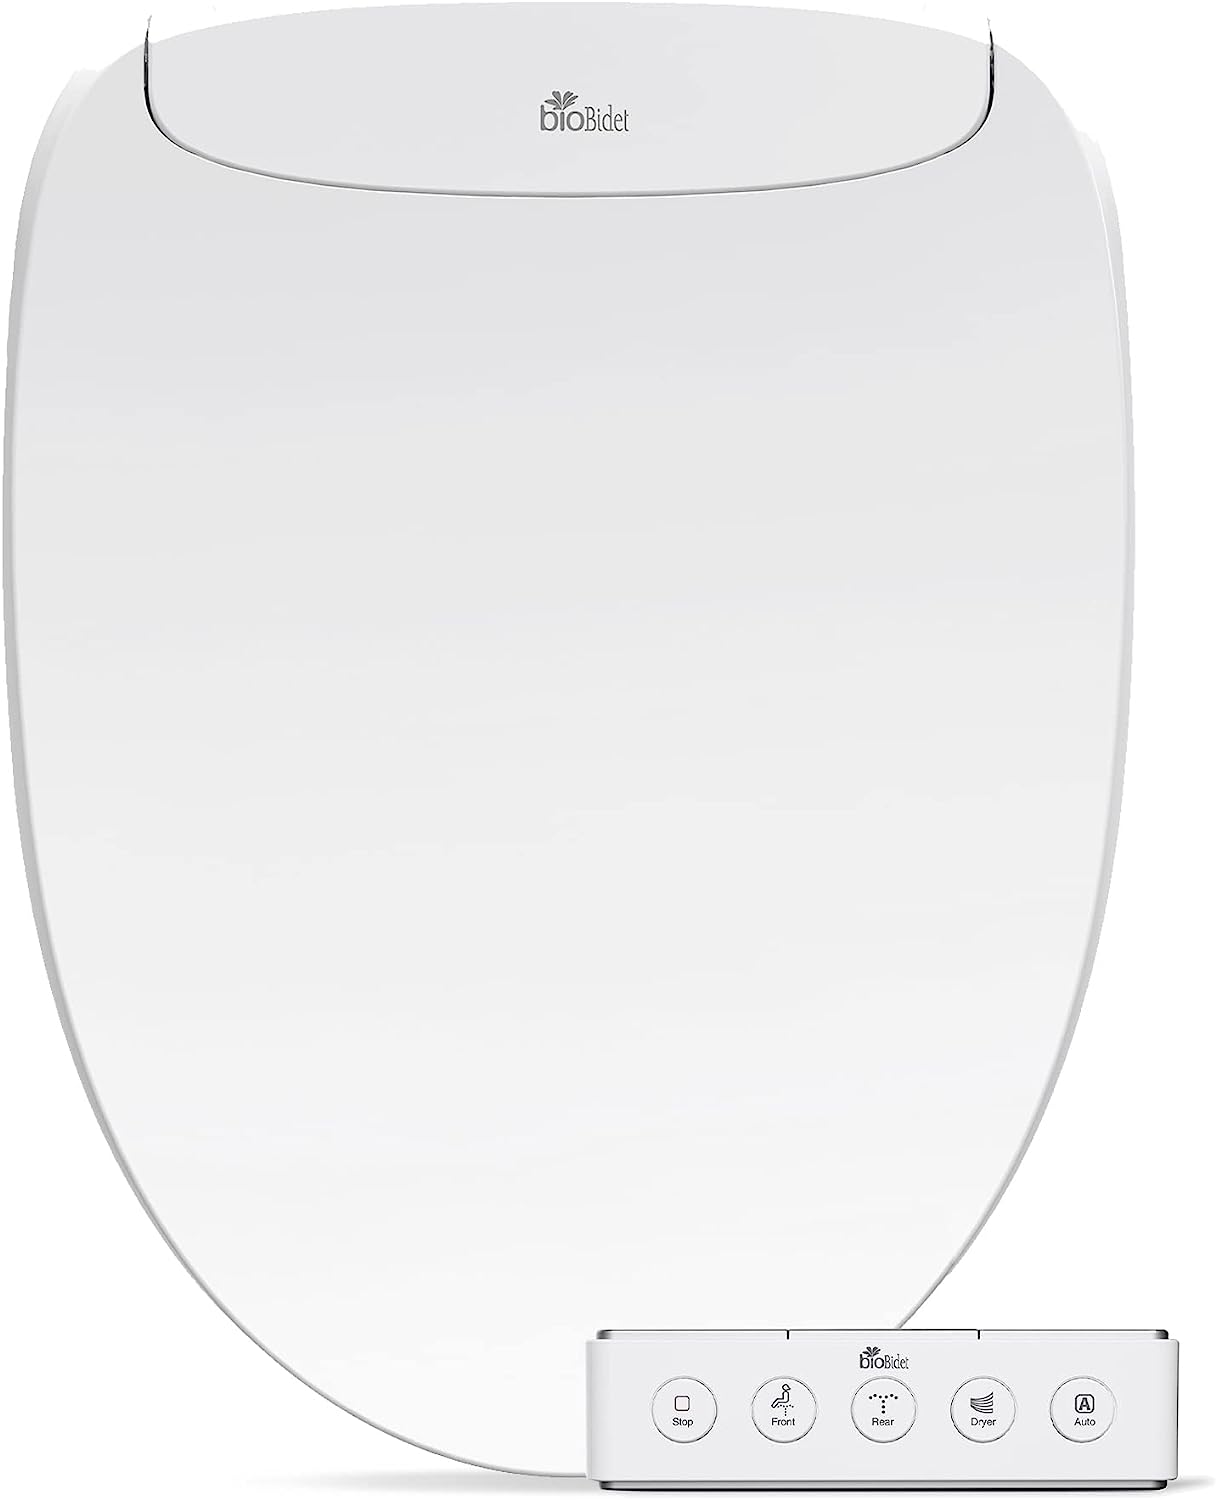 Bio Bidet Discovery DLS Electric Bidet Seat for Elongated Toilets in White with Auto Open $524 + Free Shipping